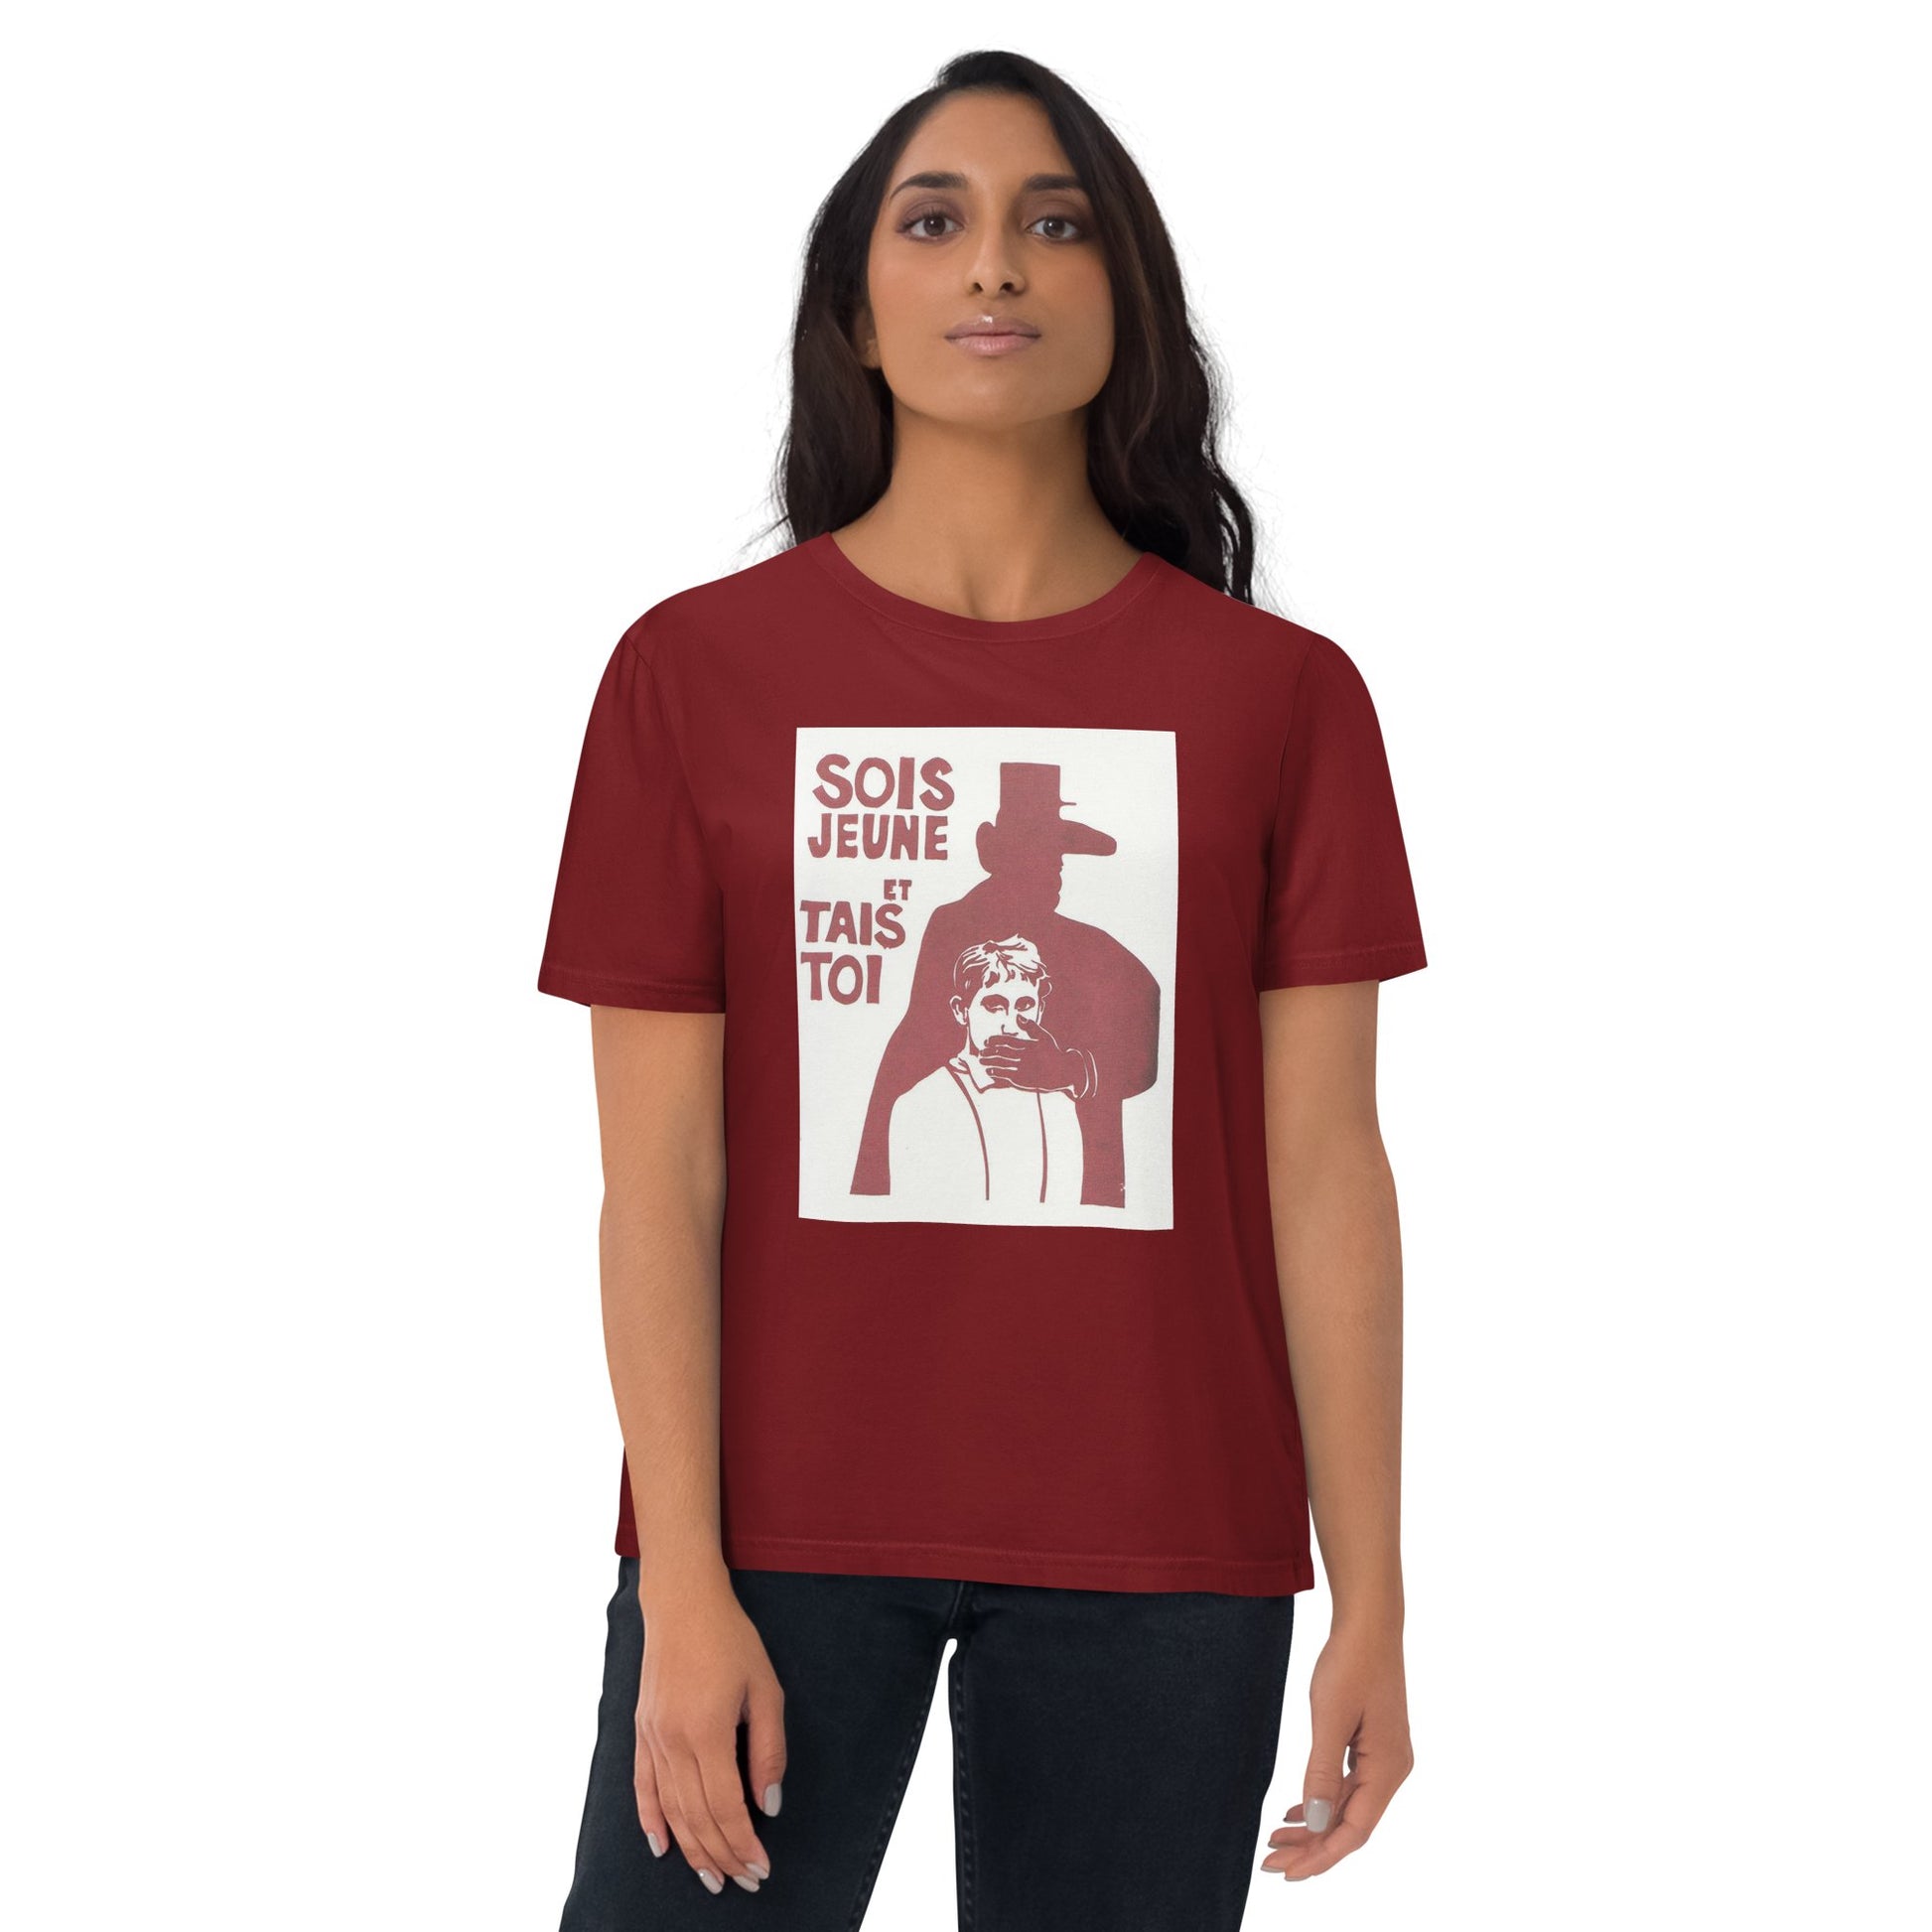 Be Young and Shut Up - Unisex organic cotton t-shirt - Souled Out World